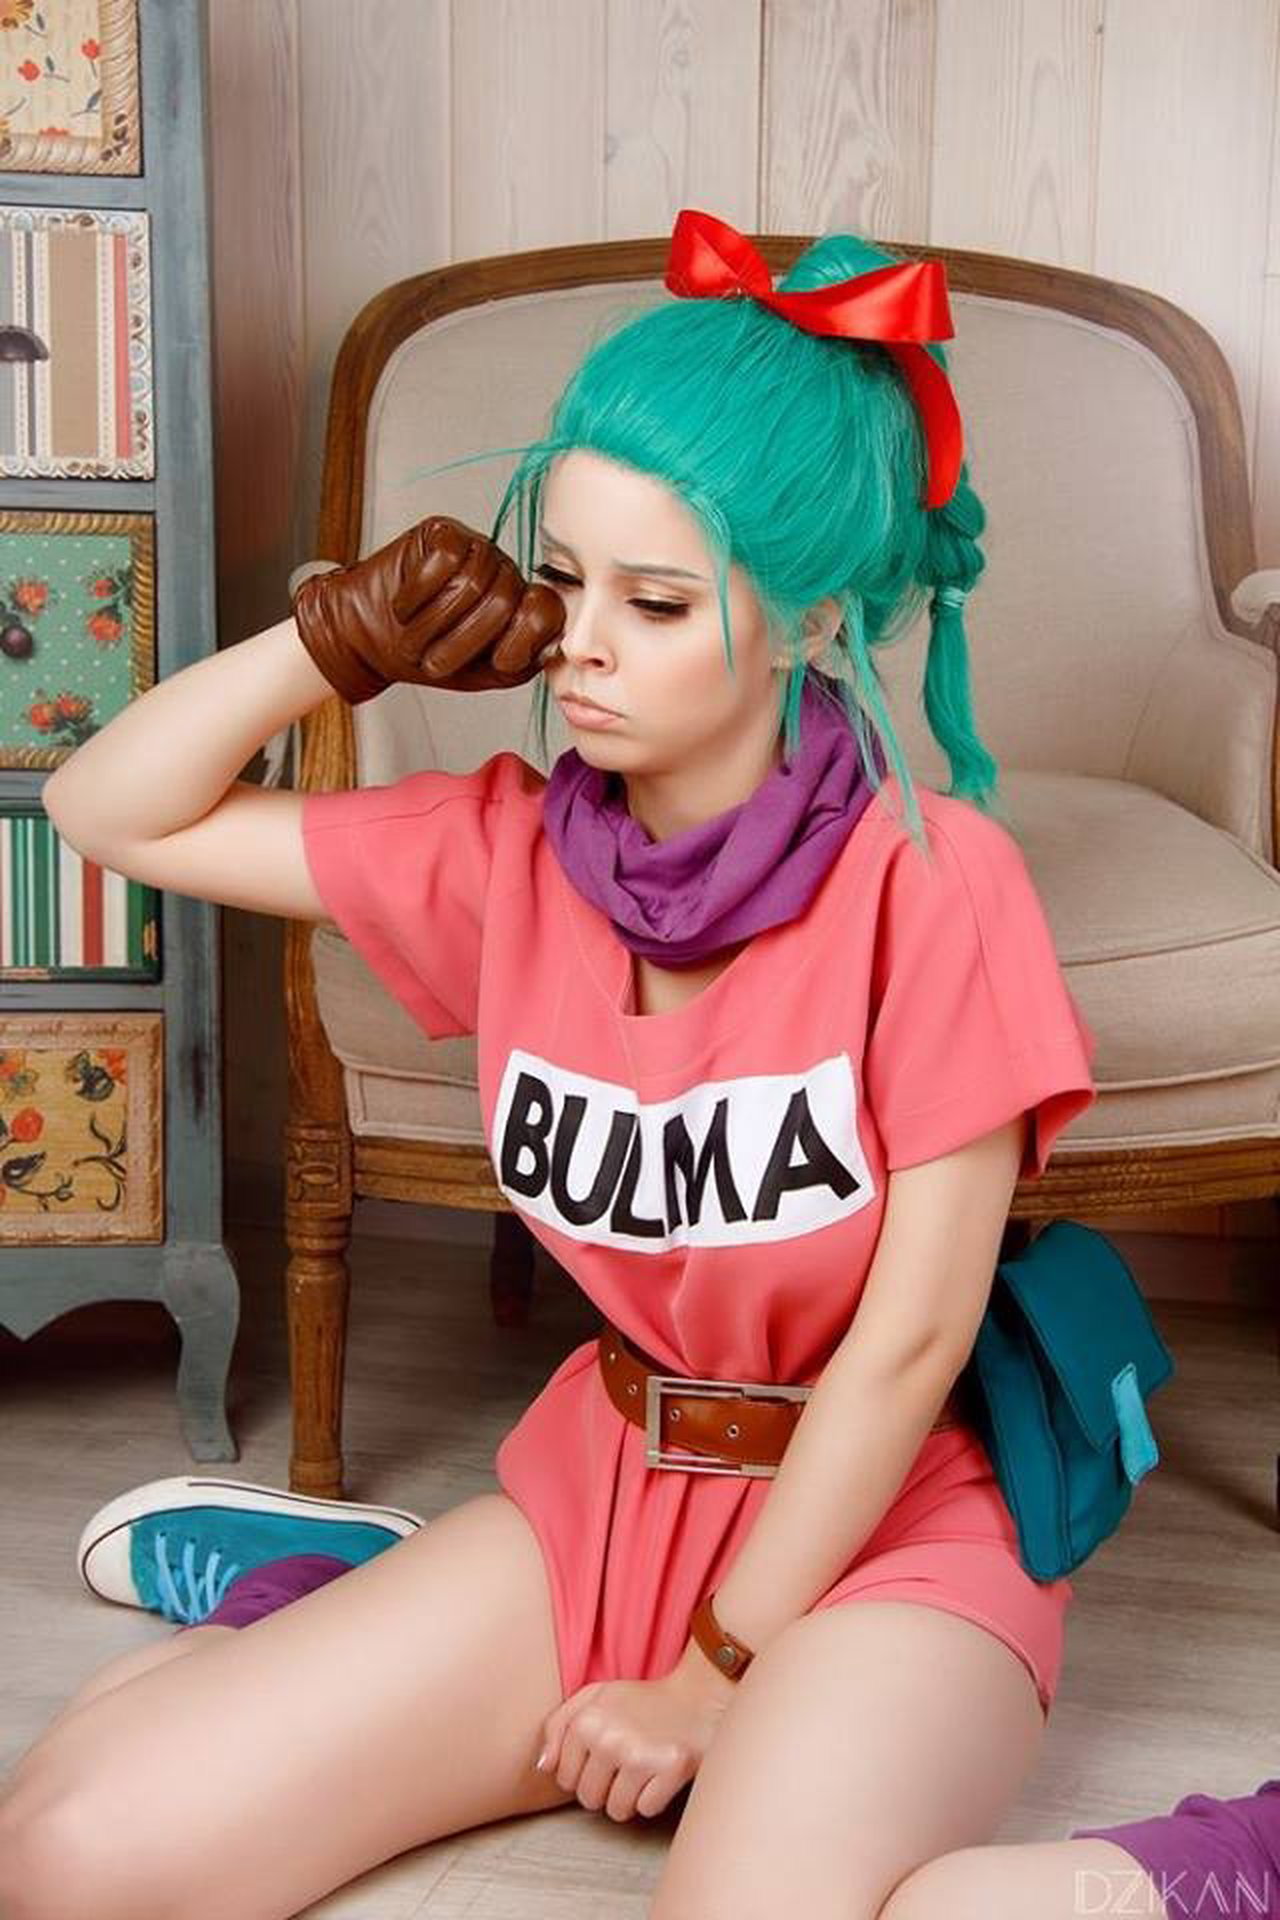 Watch the Photo by Sunsura with the username @Sunsura, posted on February 19, 2017 and the text says 'Cosplay Bulma #DBZ  #Cosplay  #Bulma  #dragon  #ball  #z'